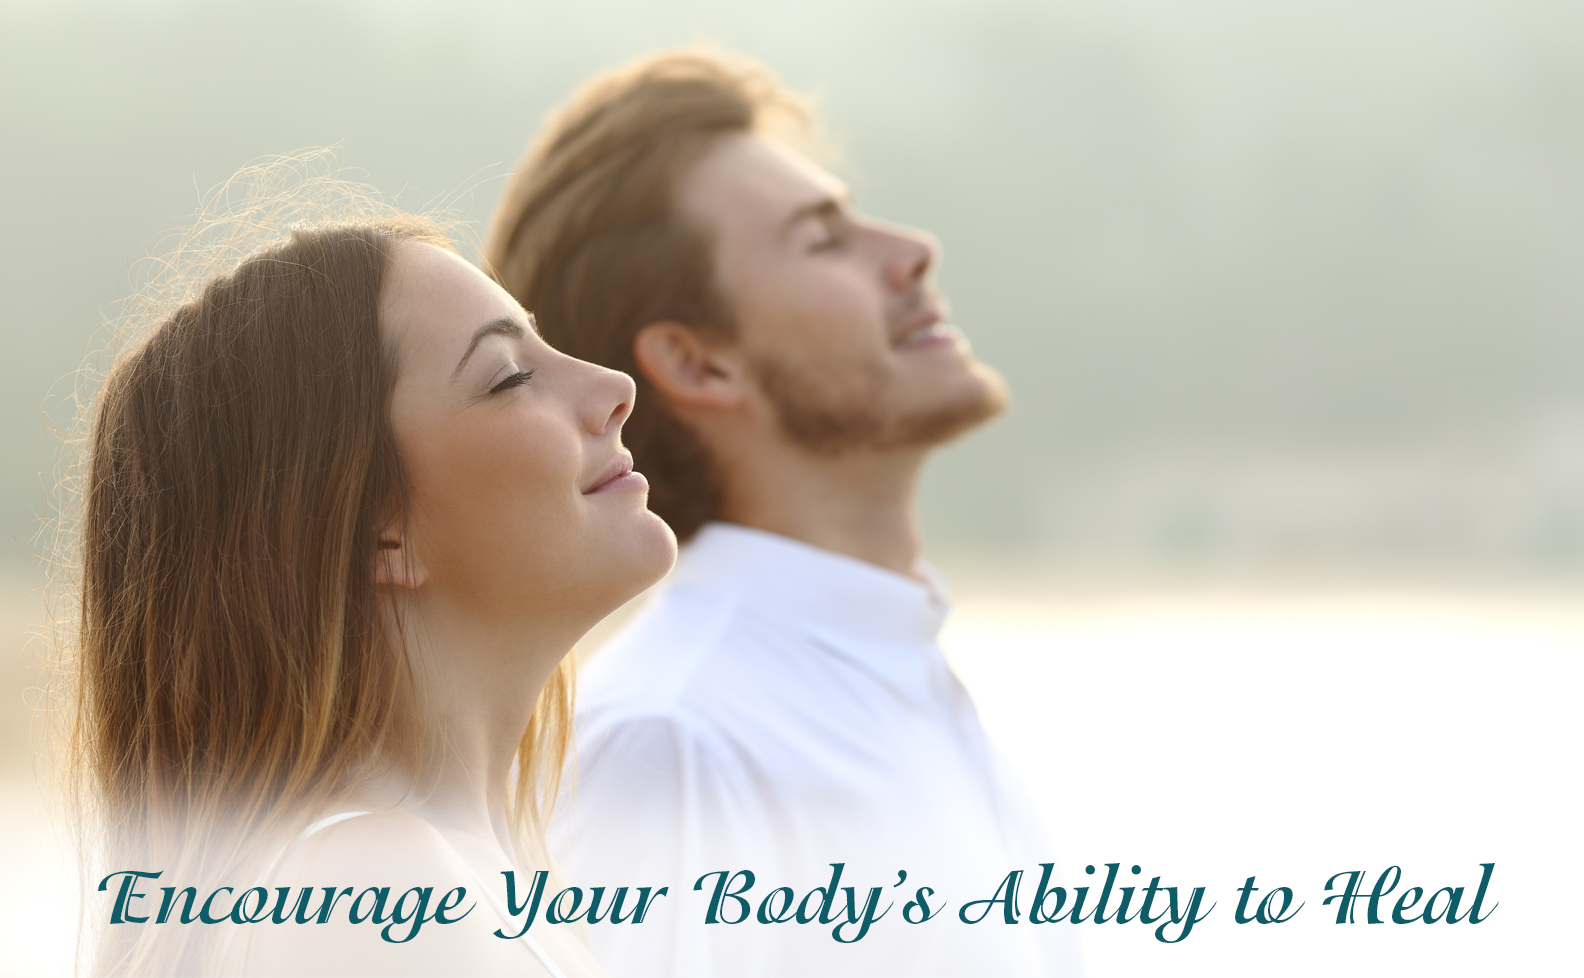 Encourage Your Body's Ability to Heal